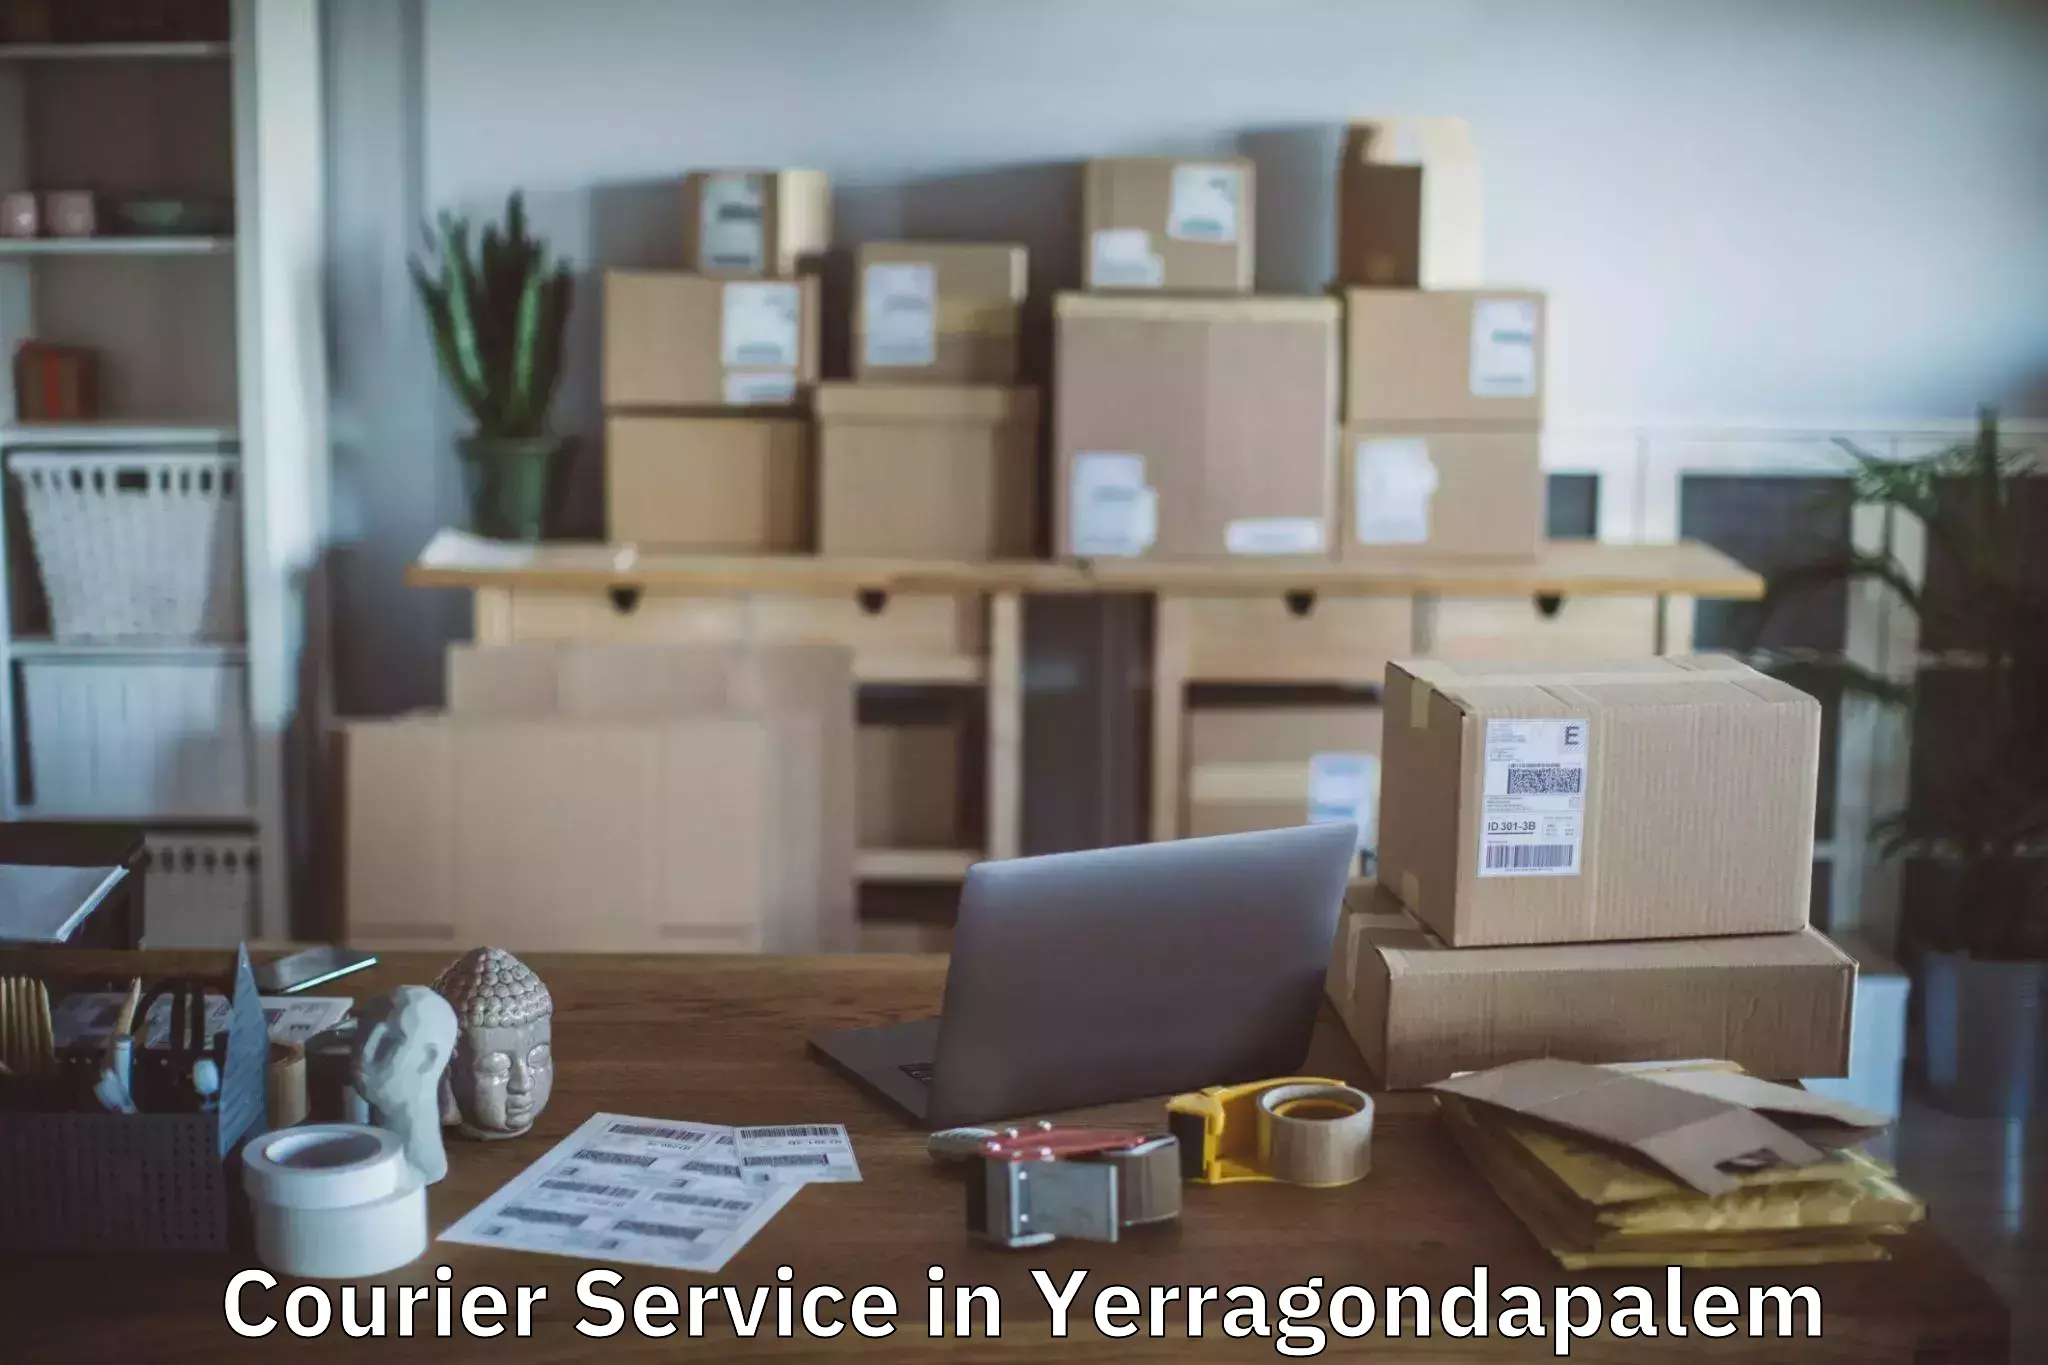 24-hour delivery options in Yerragondapalem